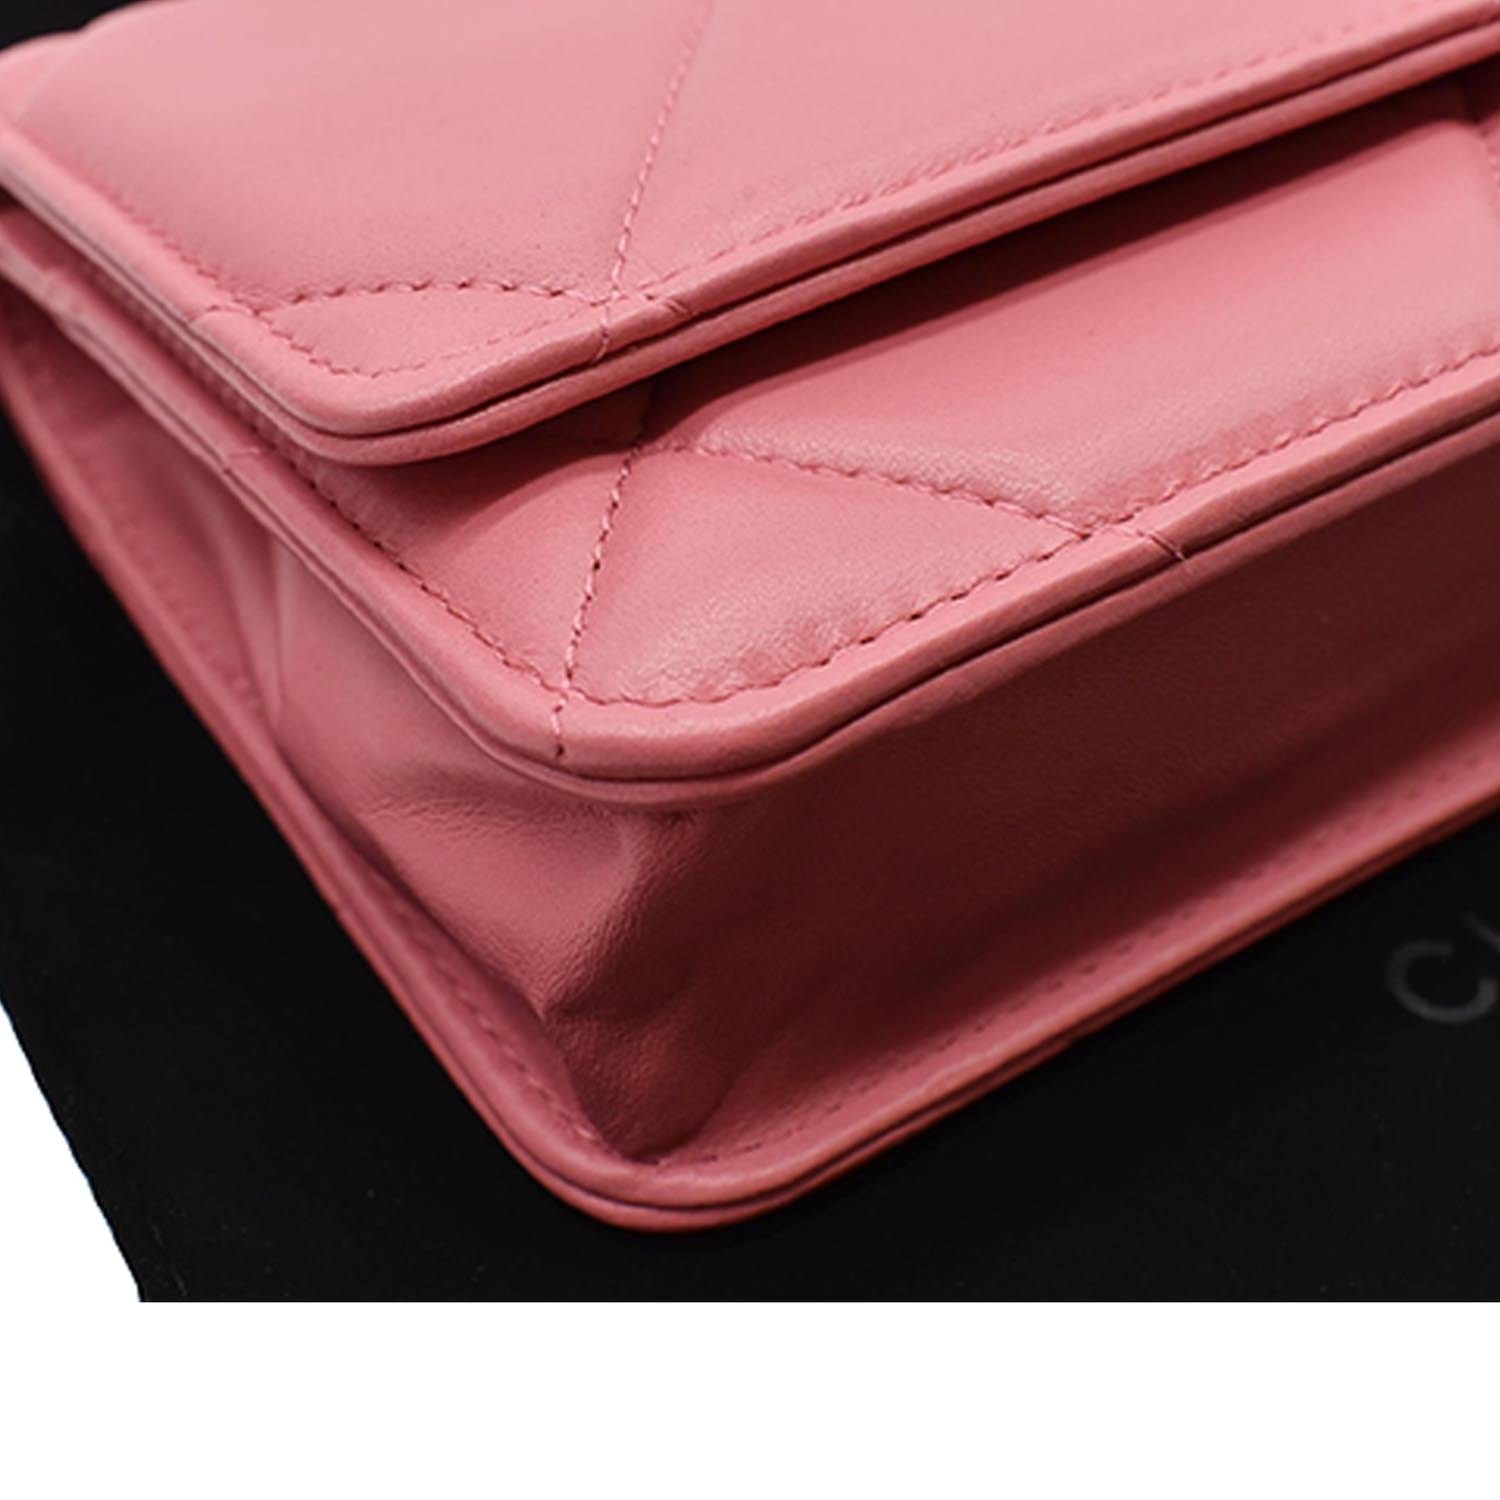 Chanel 19 leather card wallet Chanel Pink in Leather - 22285790